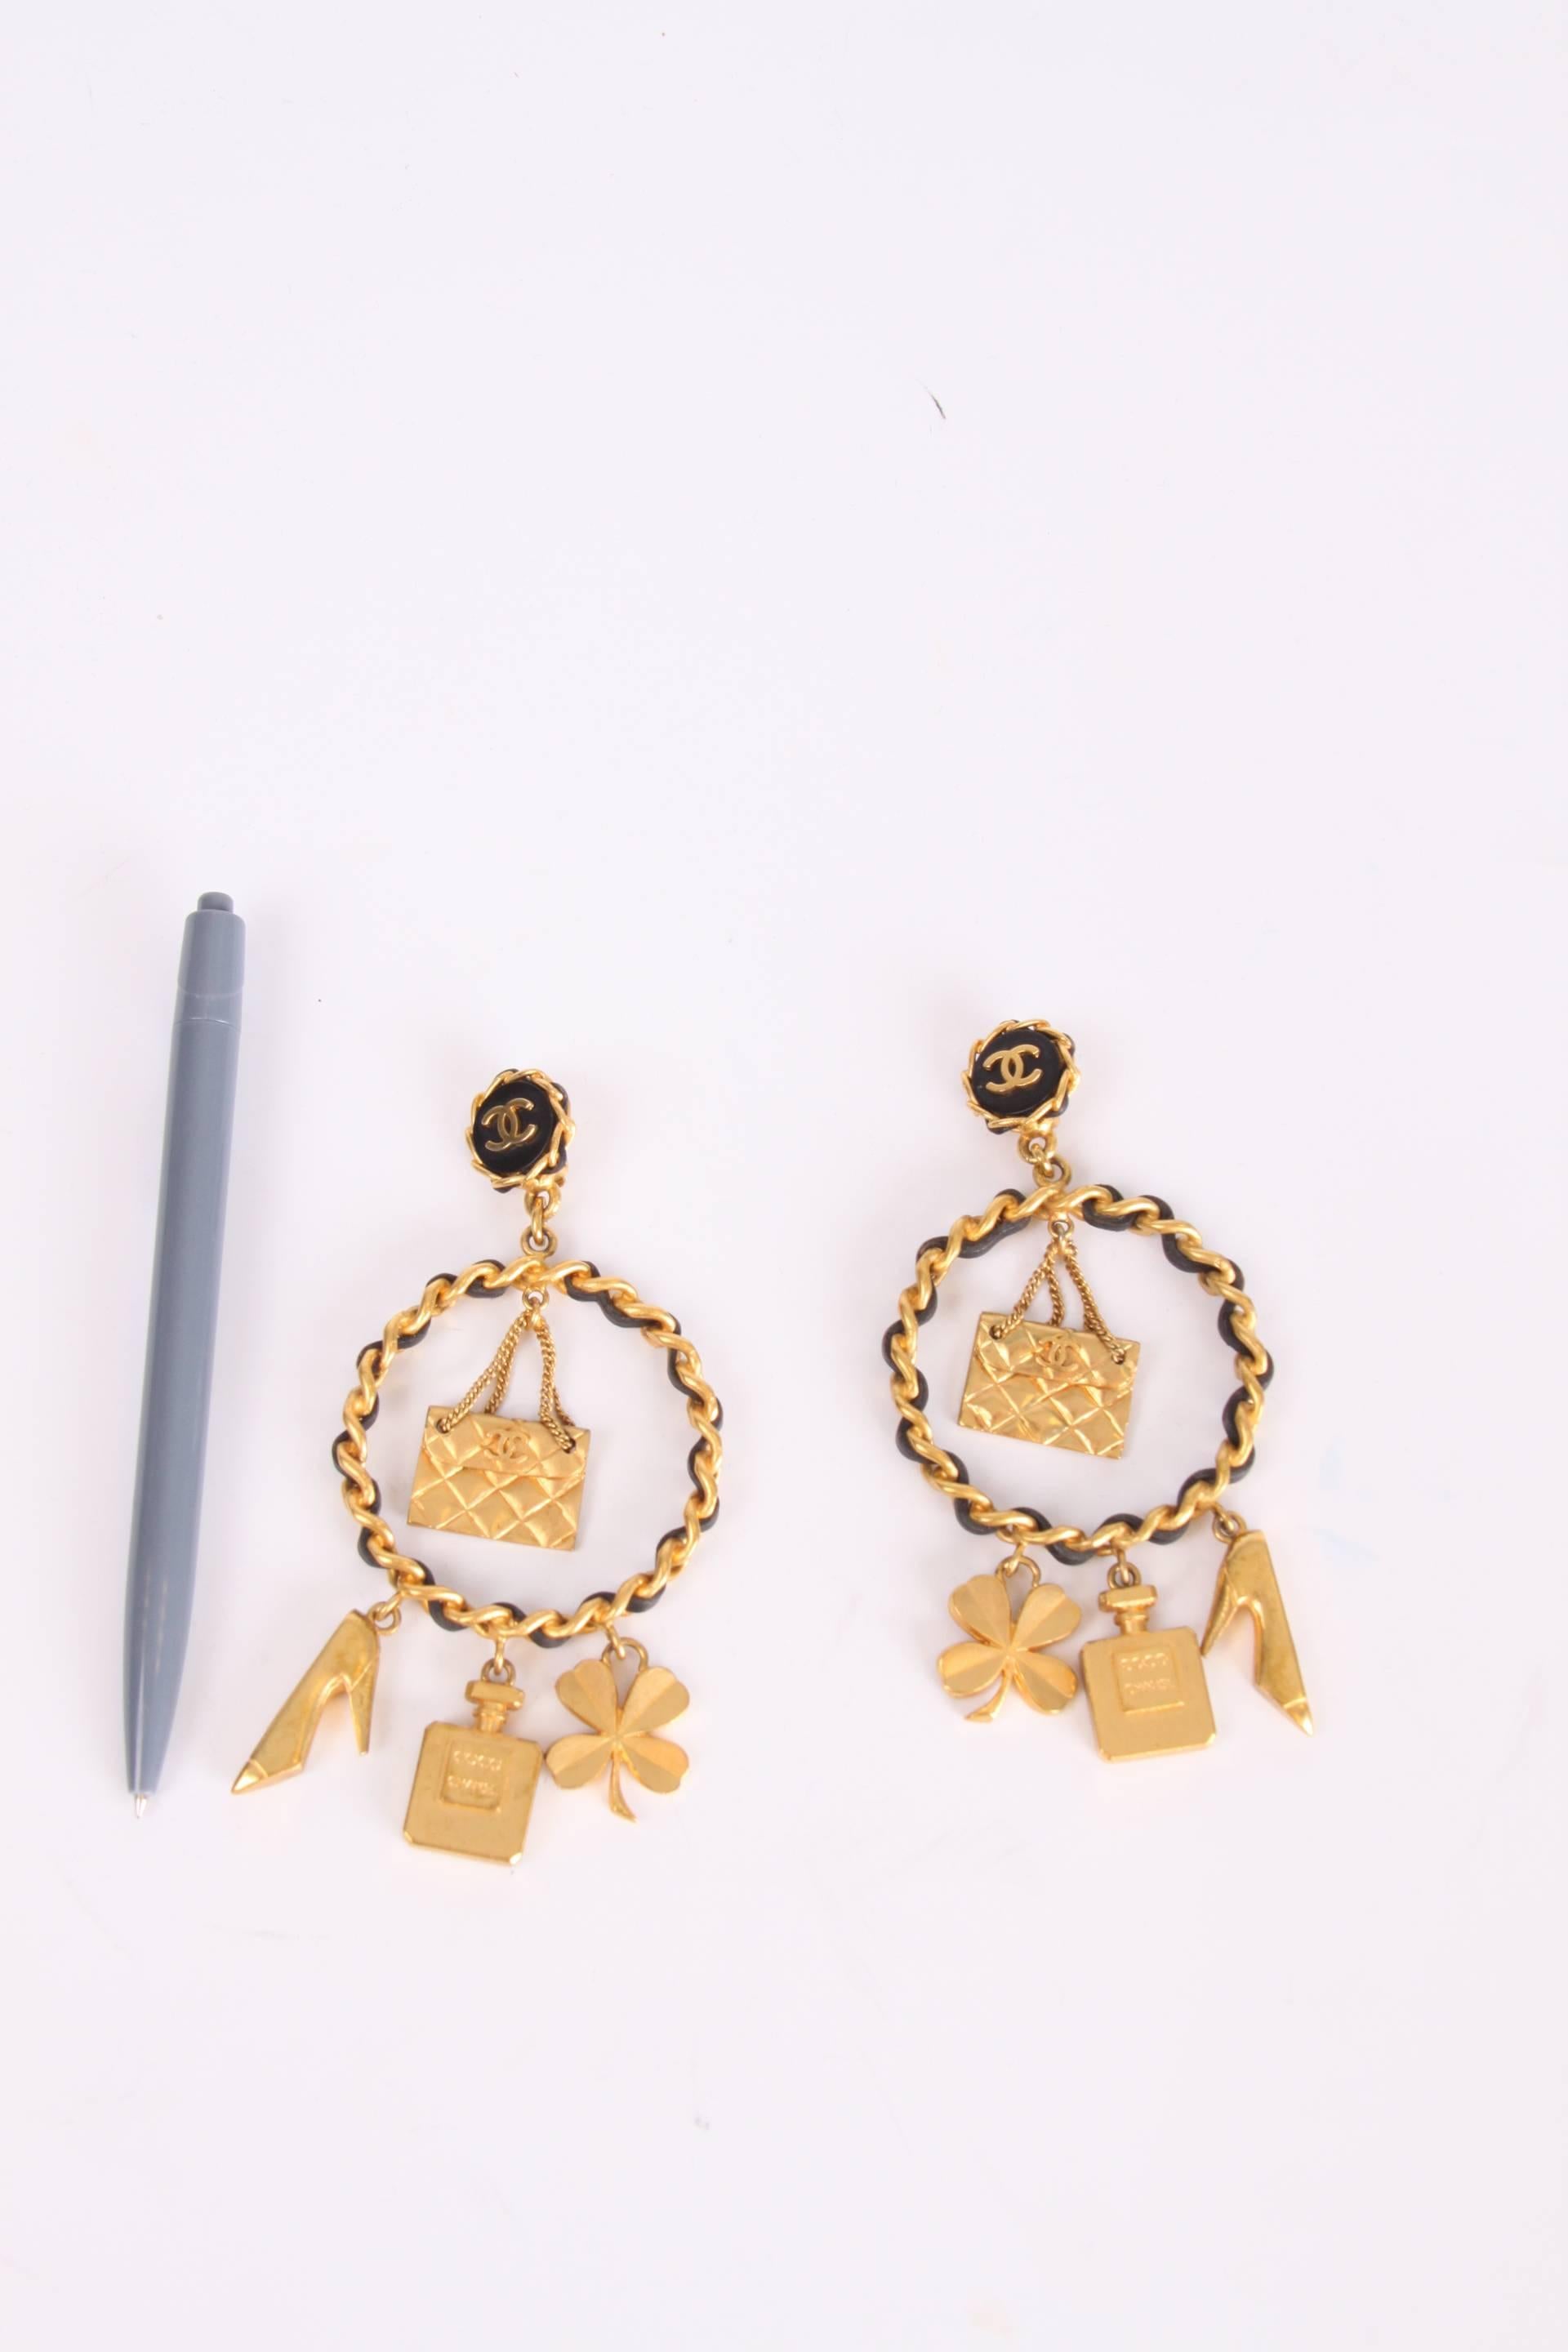 Rare vintage Chanel earrings in a rather large size, real statement pieces!

These gold-tone clip earrings have a diameter of 5,5 centimeters and hold as much as 4 charms which represent the iconic fashion brand: a four-leaf clover, Coco Chanel